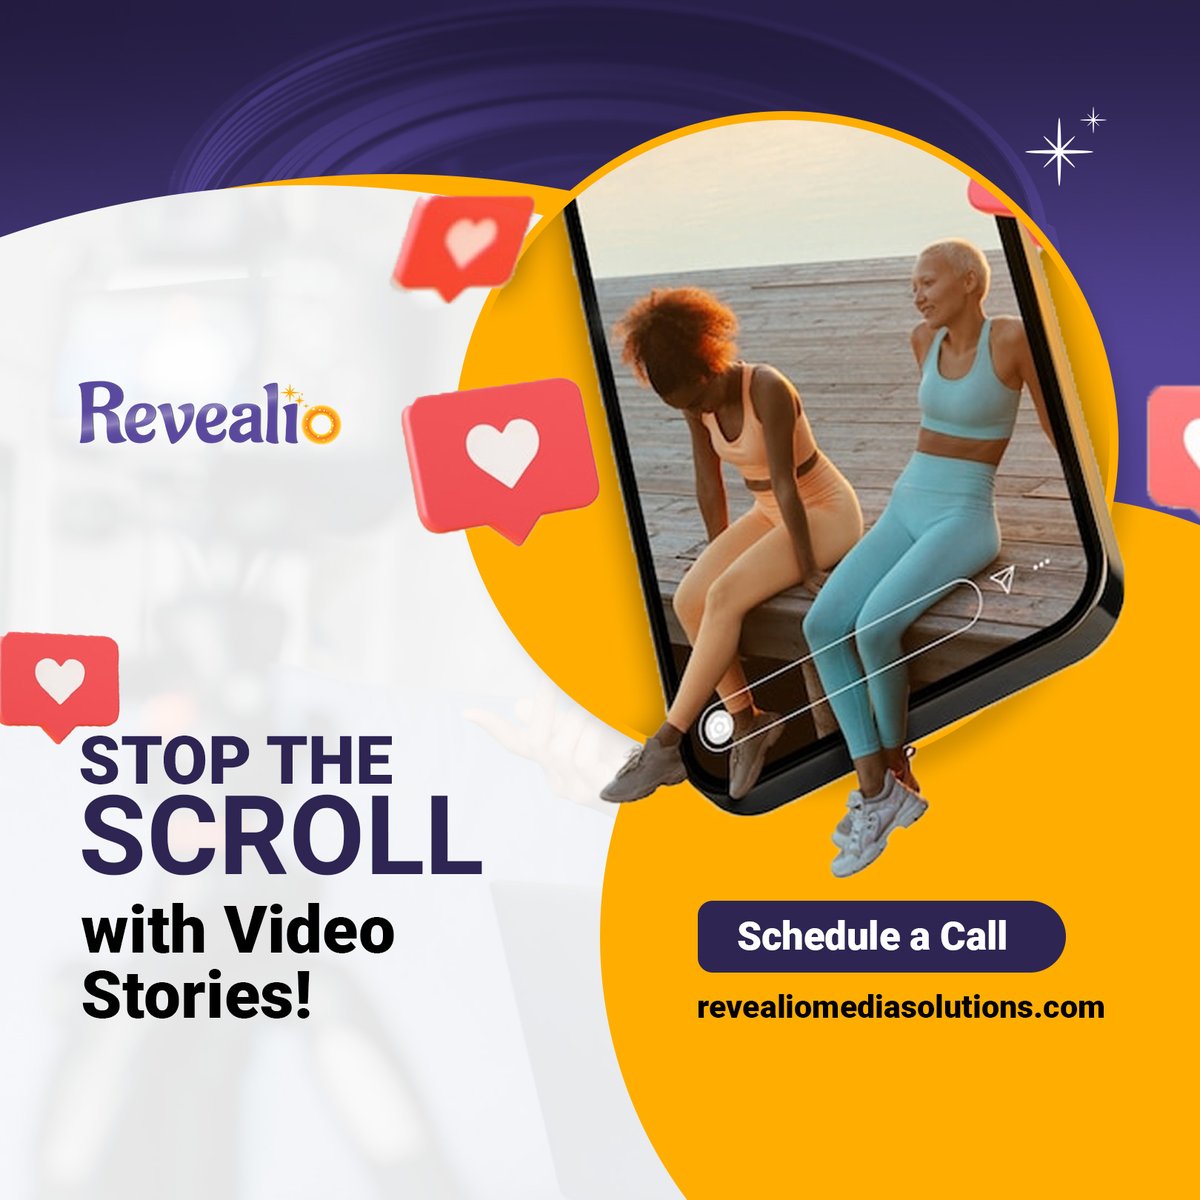 Let REVEALiO help you stop the scroll and get the attention your business needs.

#video #story #stopthescroll #videostorytelling #videomarketing #shortformvideo #leadgeneration #relatability #smallbusinessvideo #nonprofitvideo #innovativestorytelling #revealio